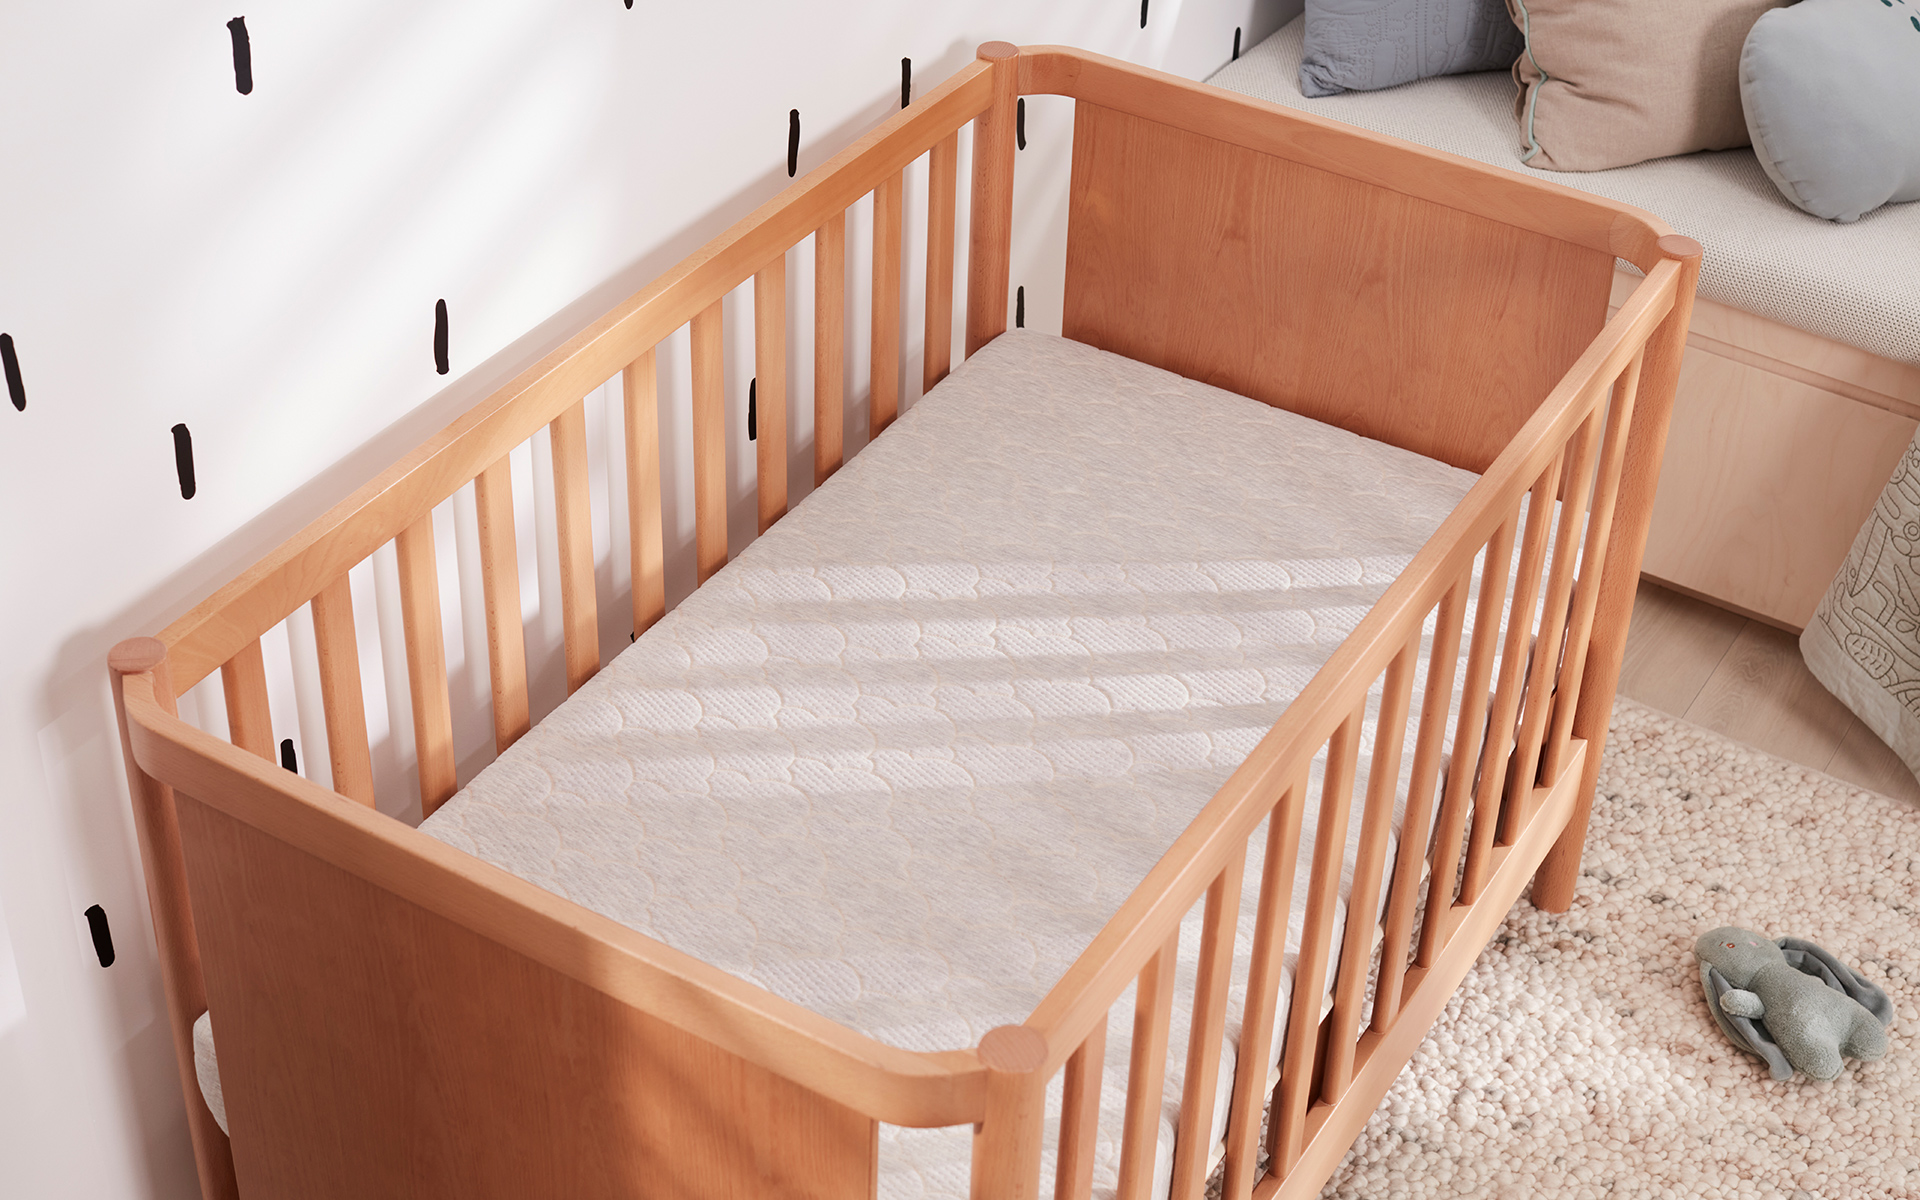 A Koala cot and mattress without a cot mattress topper, in a beautiful designed room